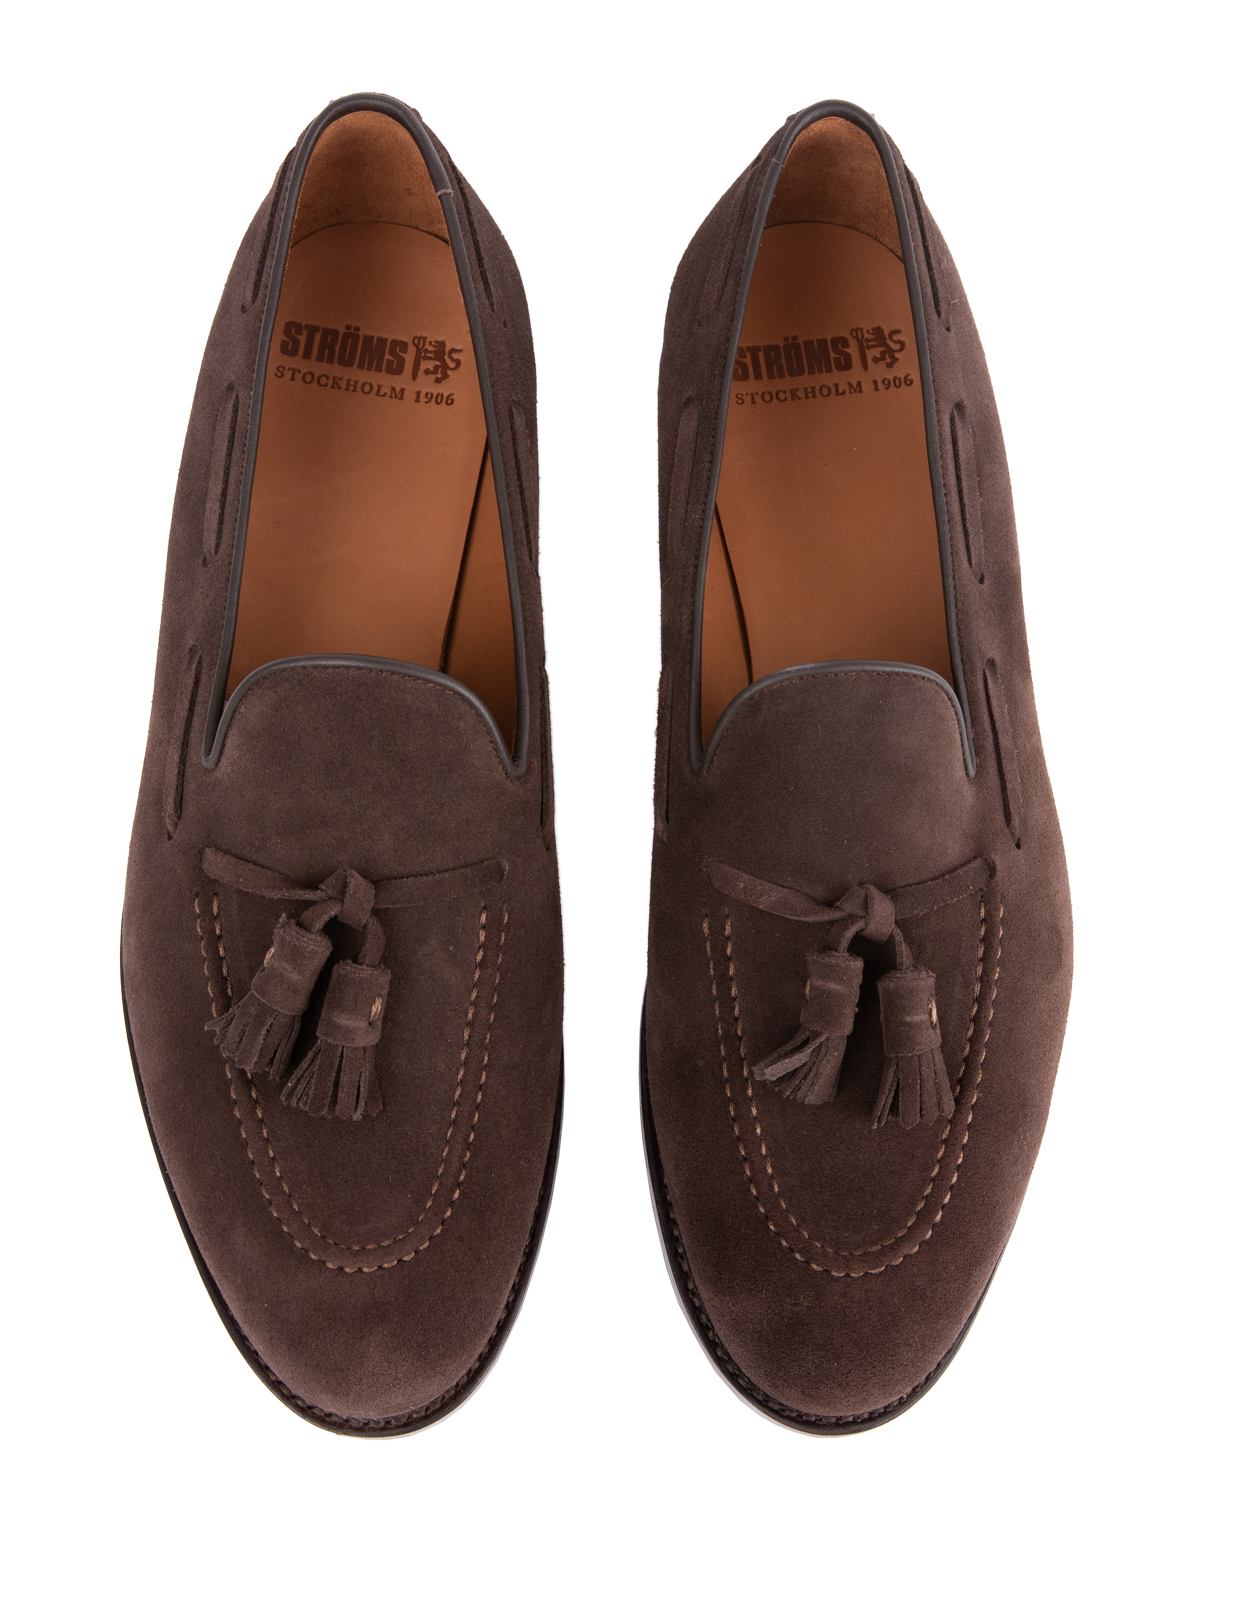 Tassel Loafers Suede Bitter Chocolate Stl 7